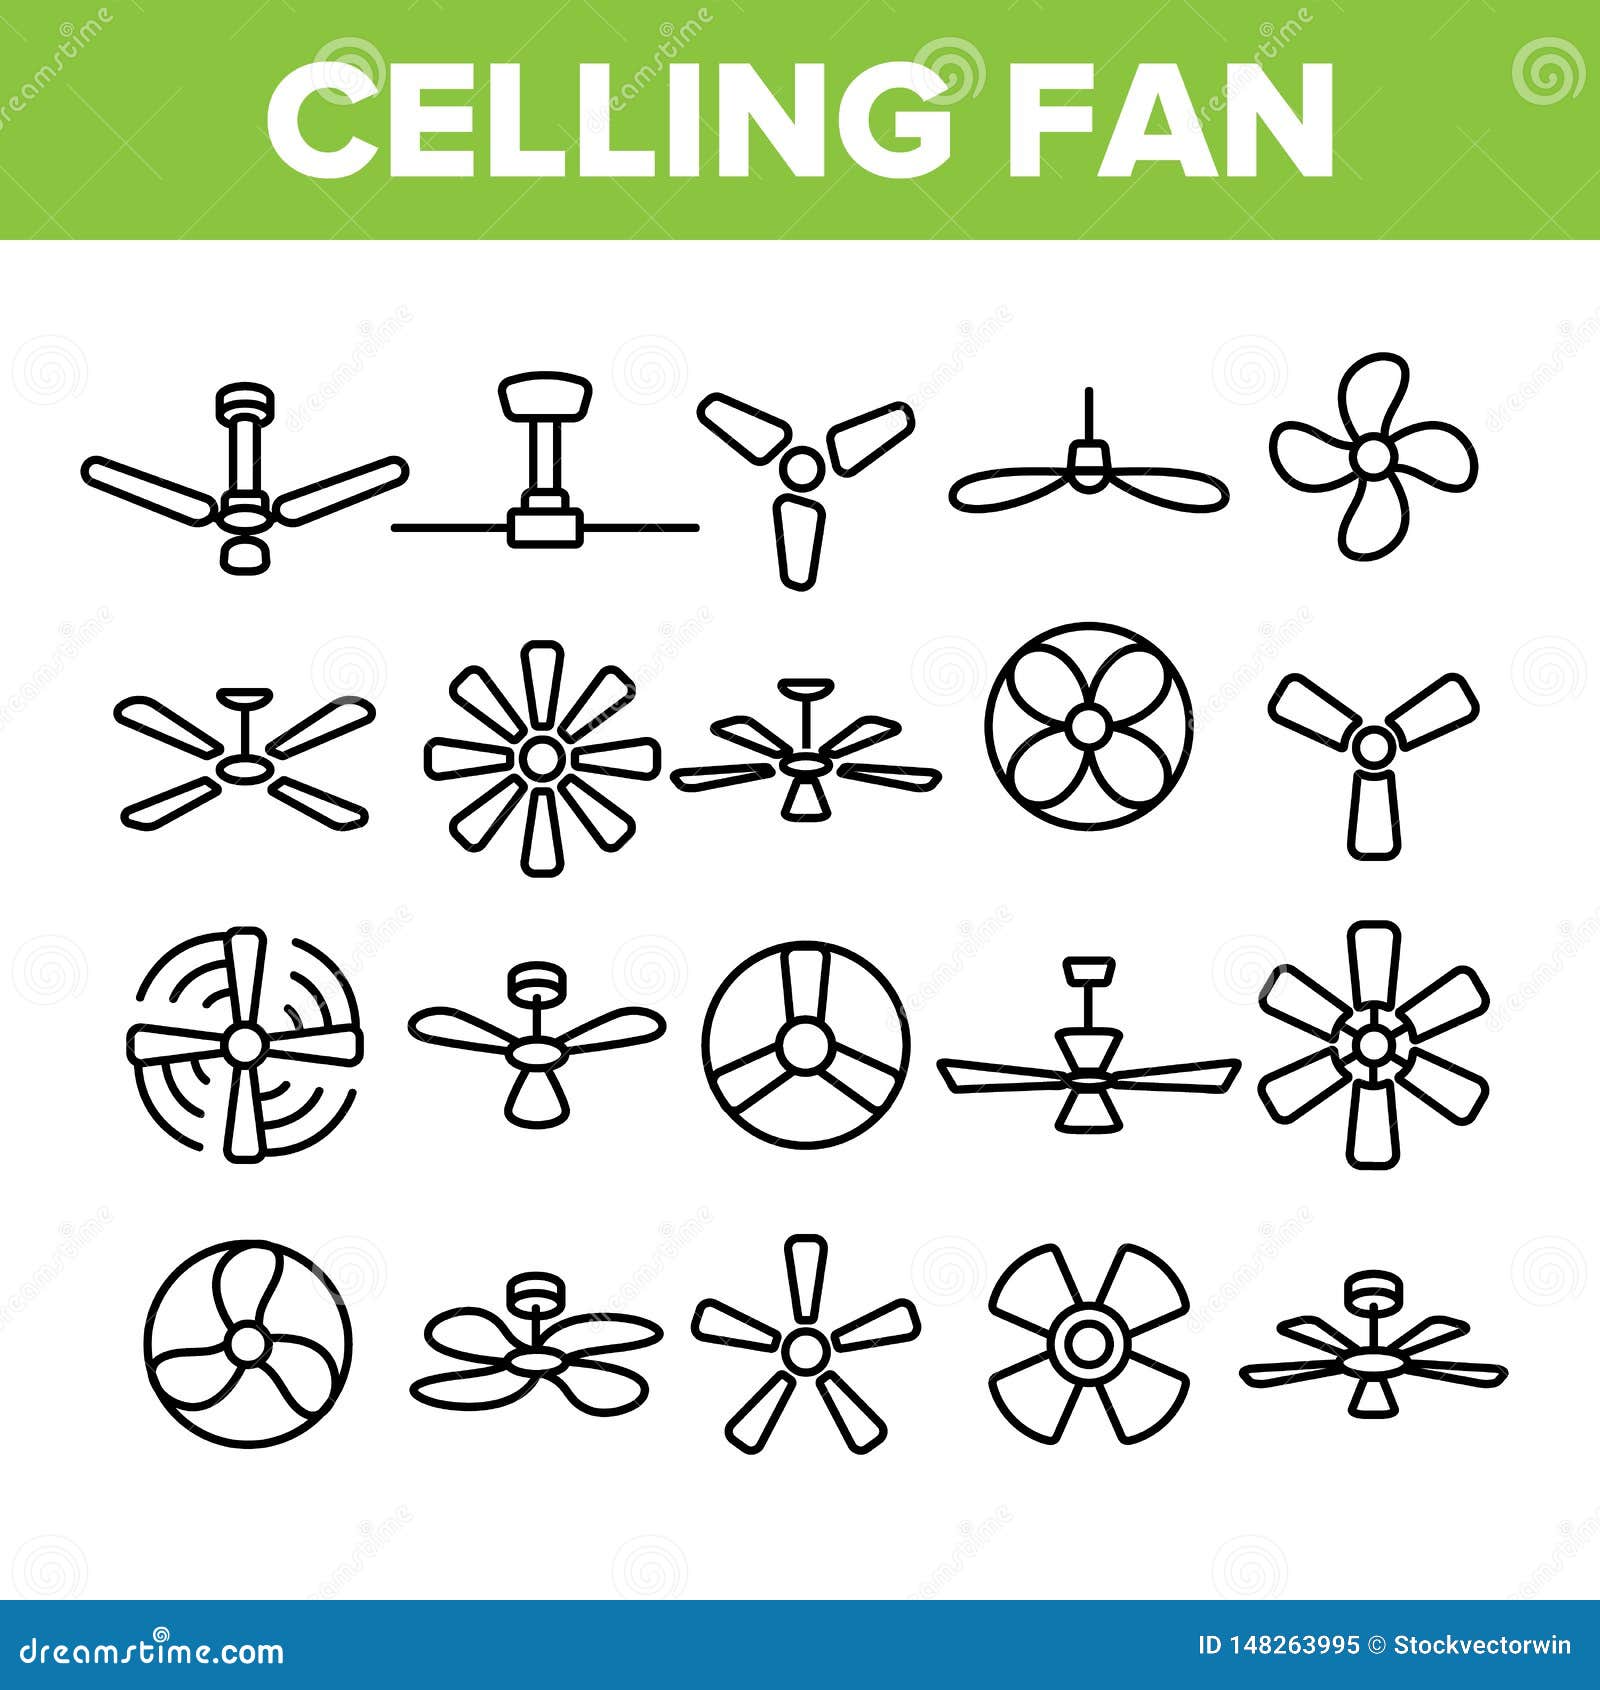 Ceiling Fans Propellers Vector Linear Icons Set Stock